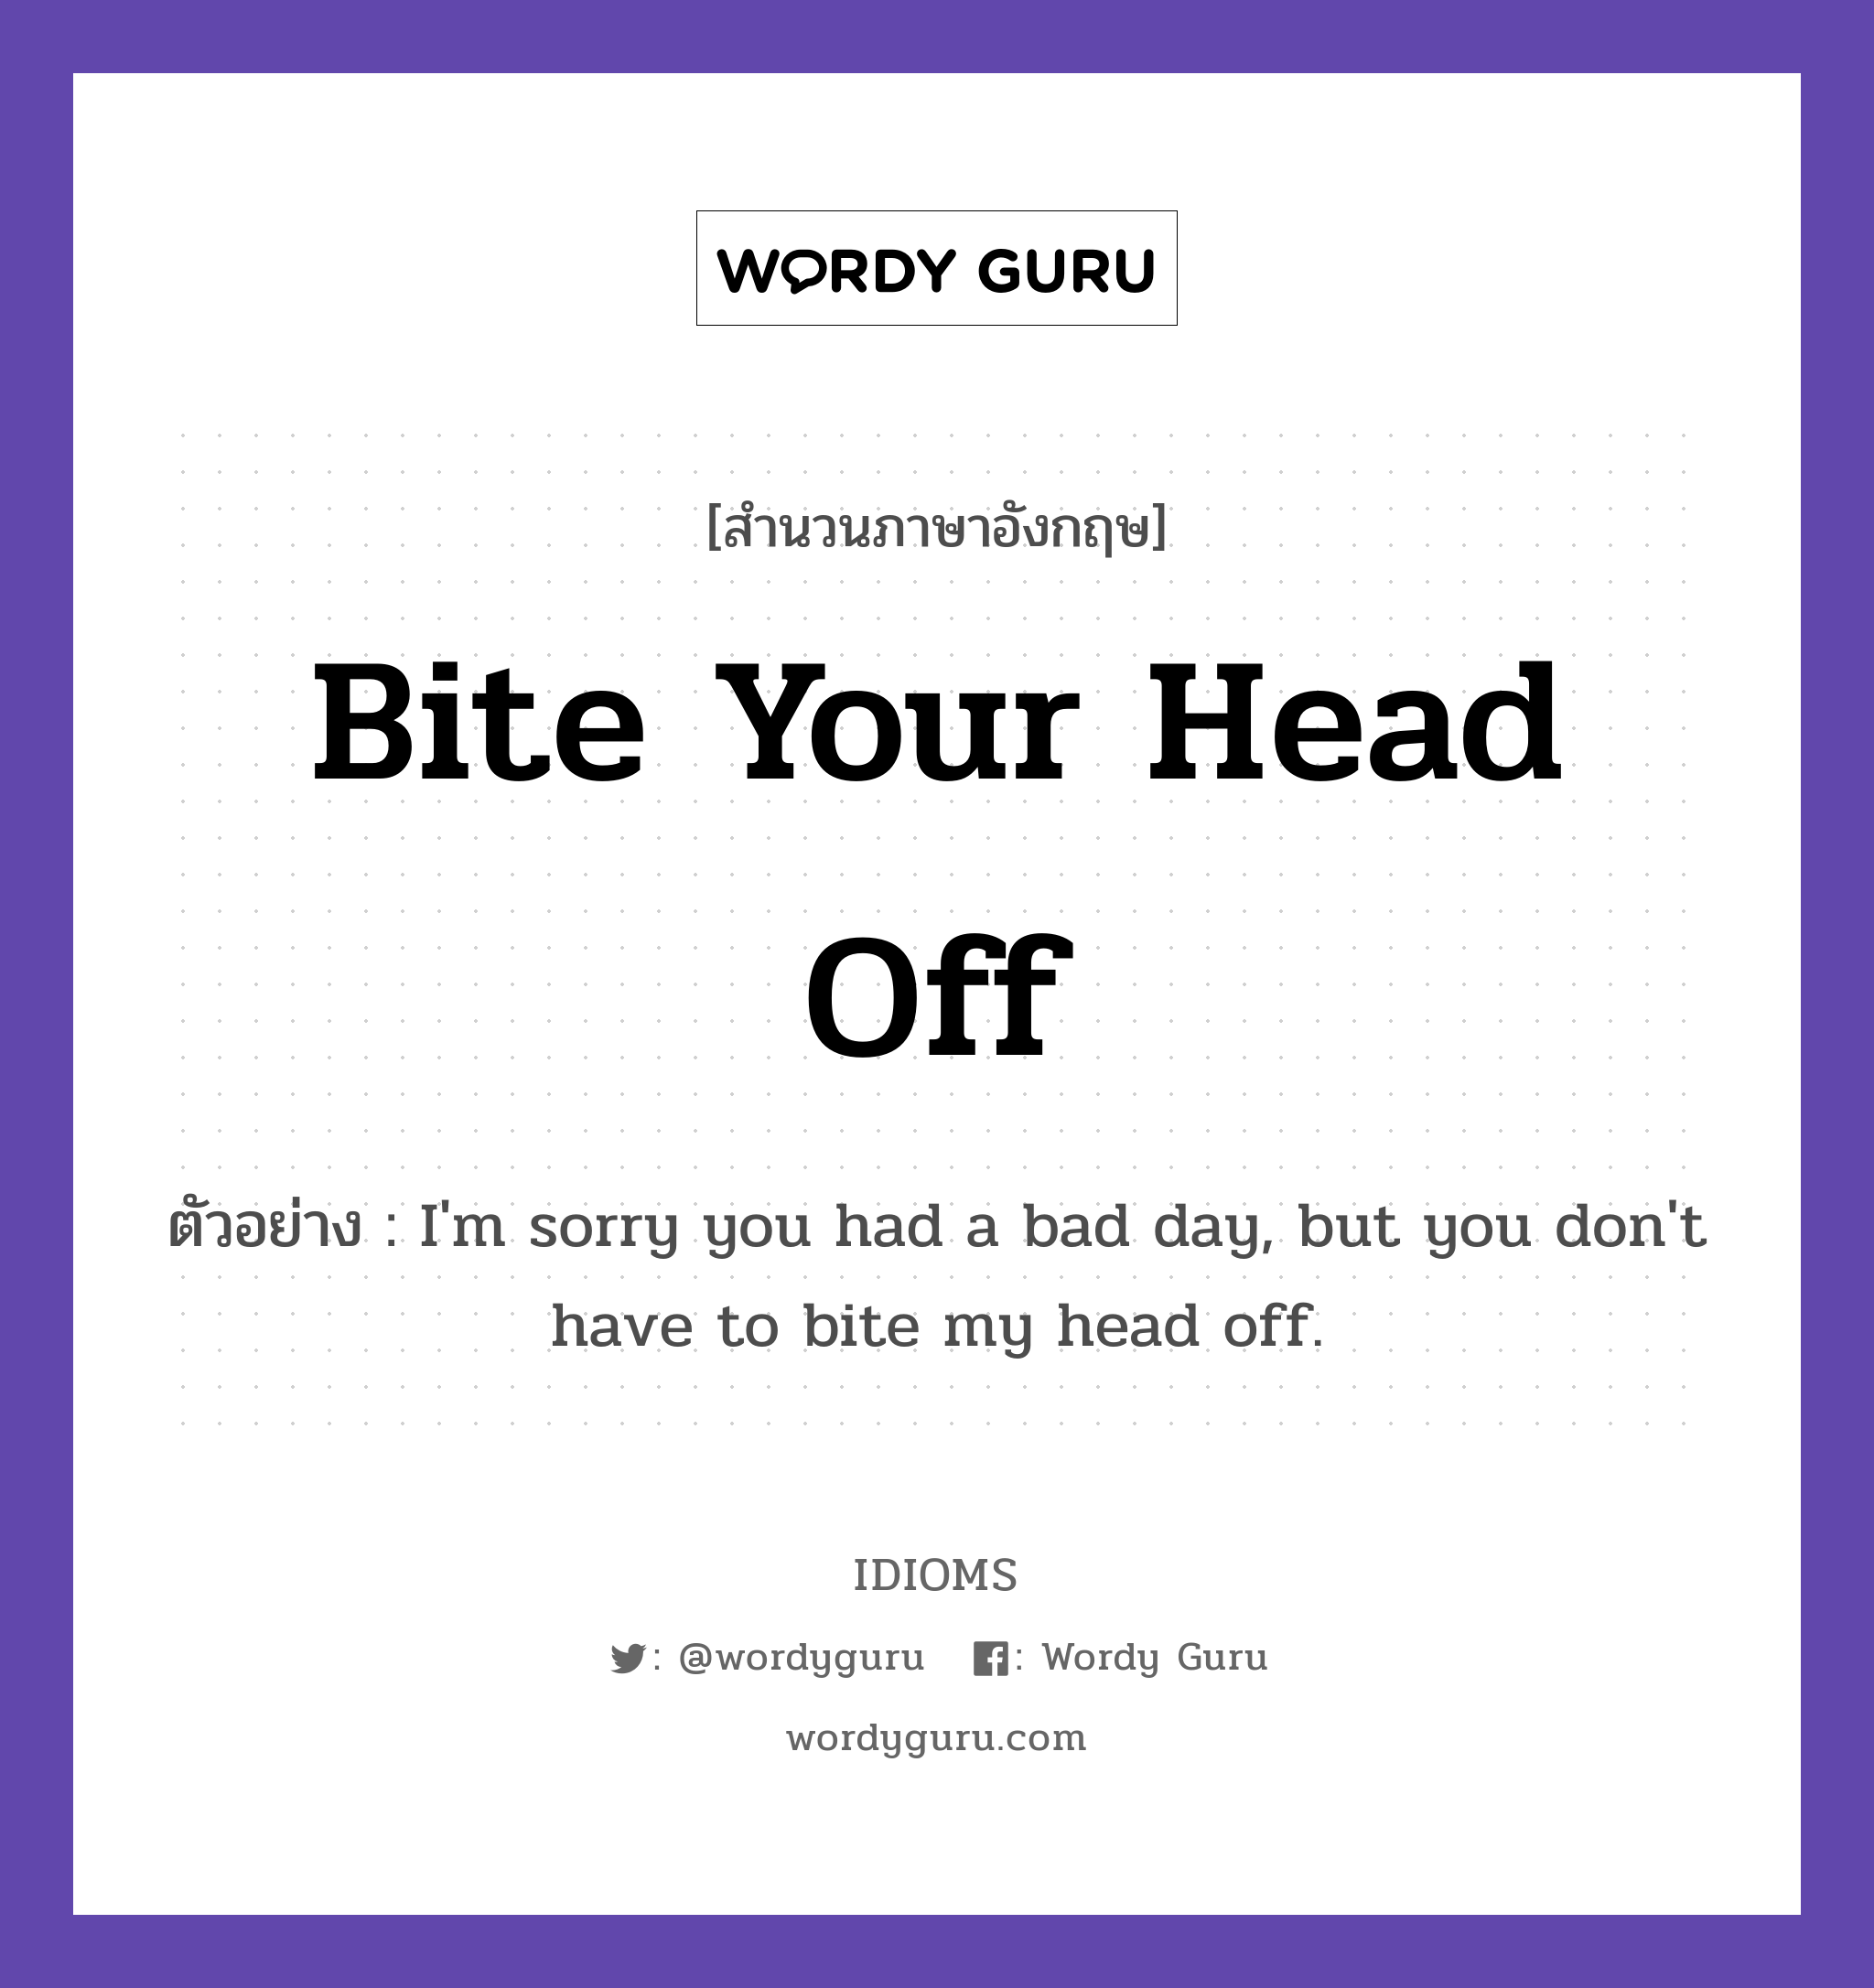 Bite Your Head Off แปลว่า?, สำนวนภาษาอังกฤษ Bite Your Head Off ตัวอย่าง I'm sorry you had a bad day, but you don't have to bite my head off.